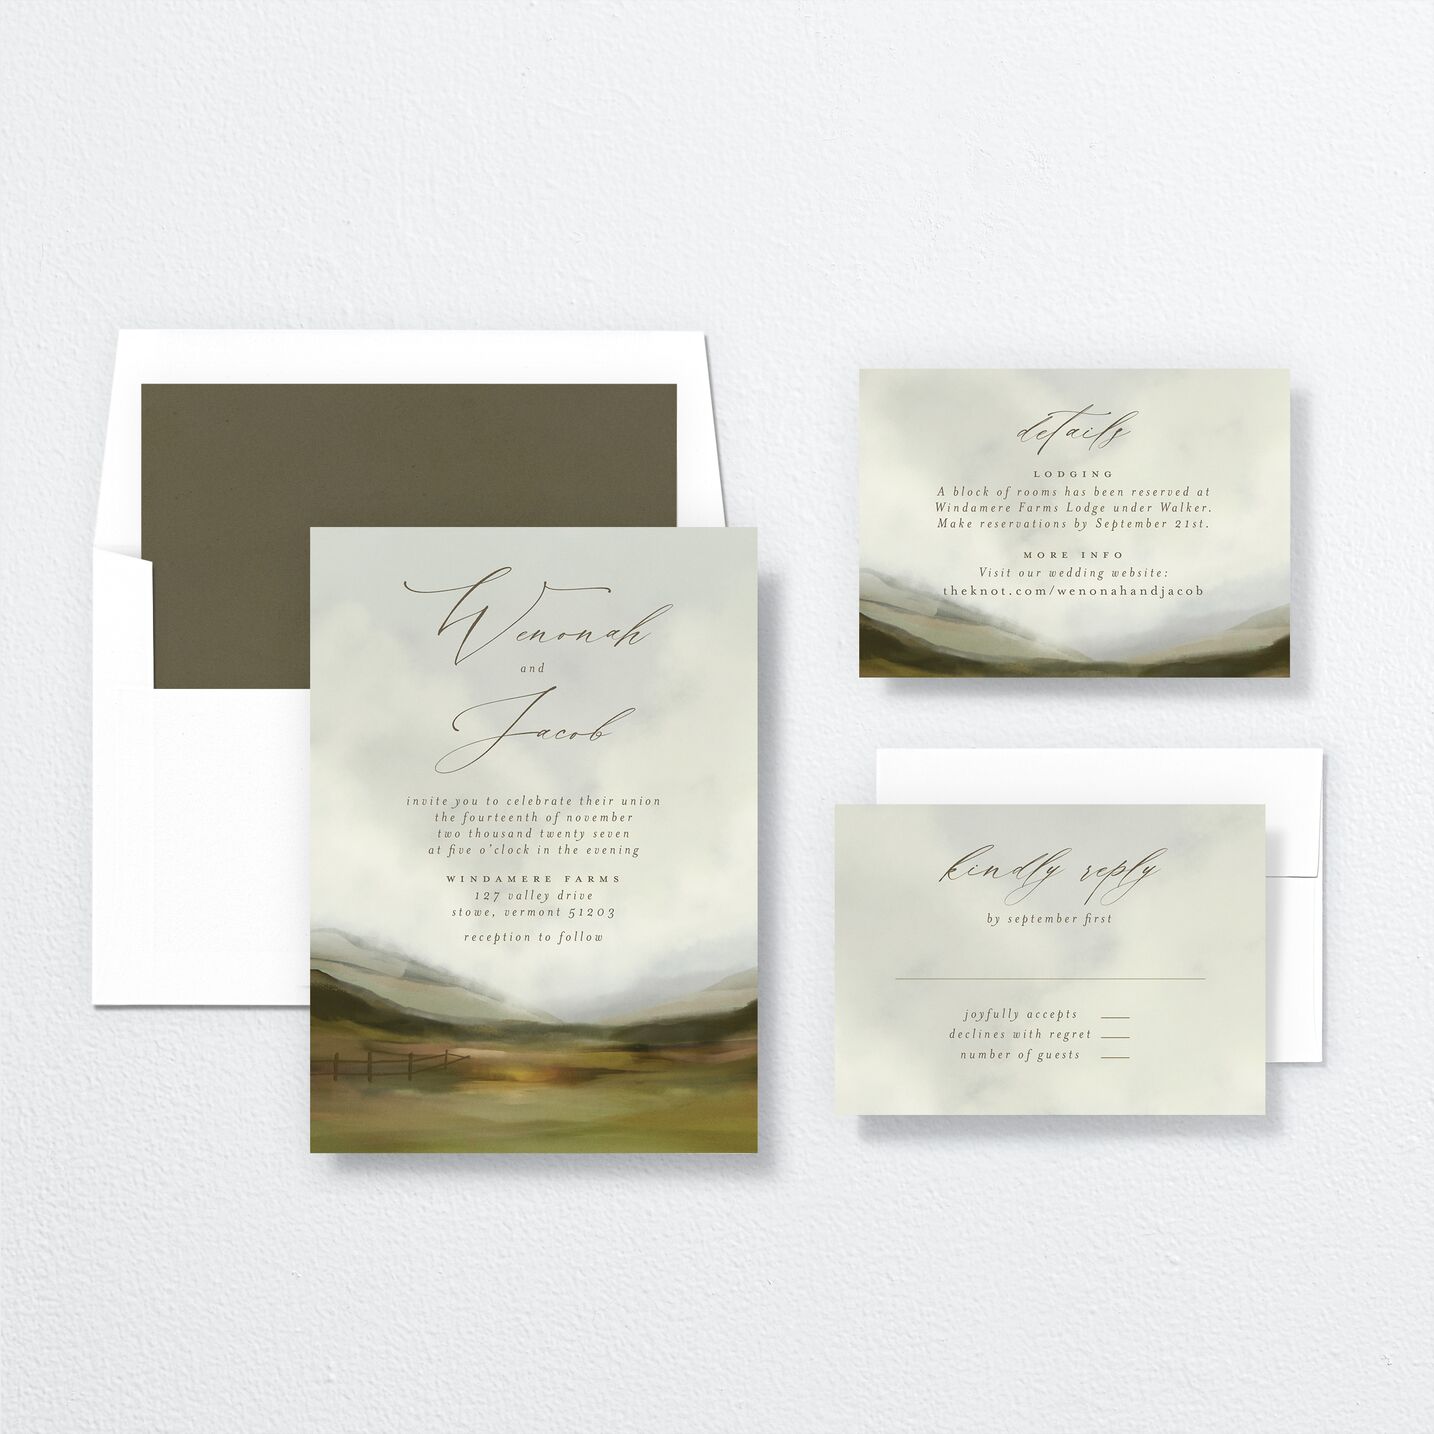 Peaceful Valley Wedding Invitations suite in green